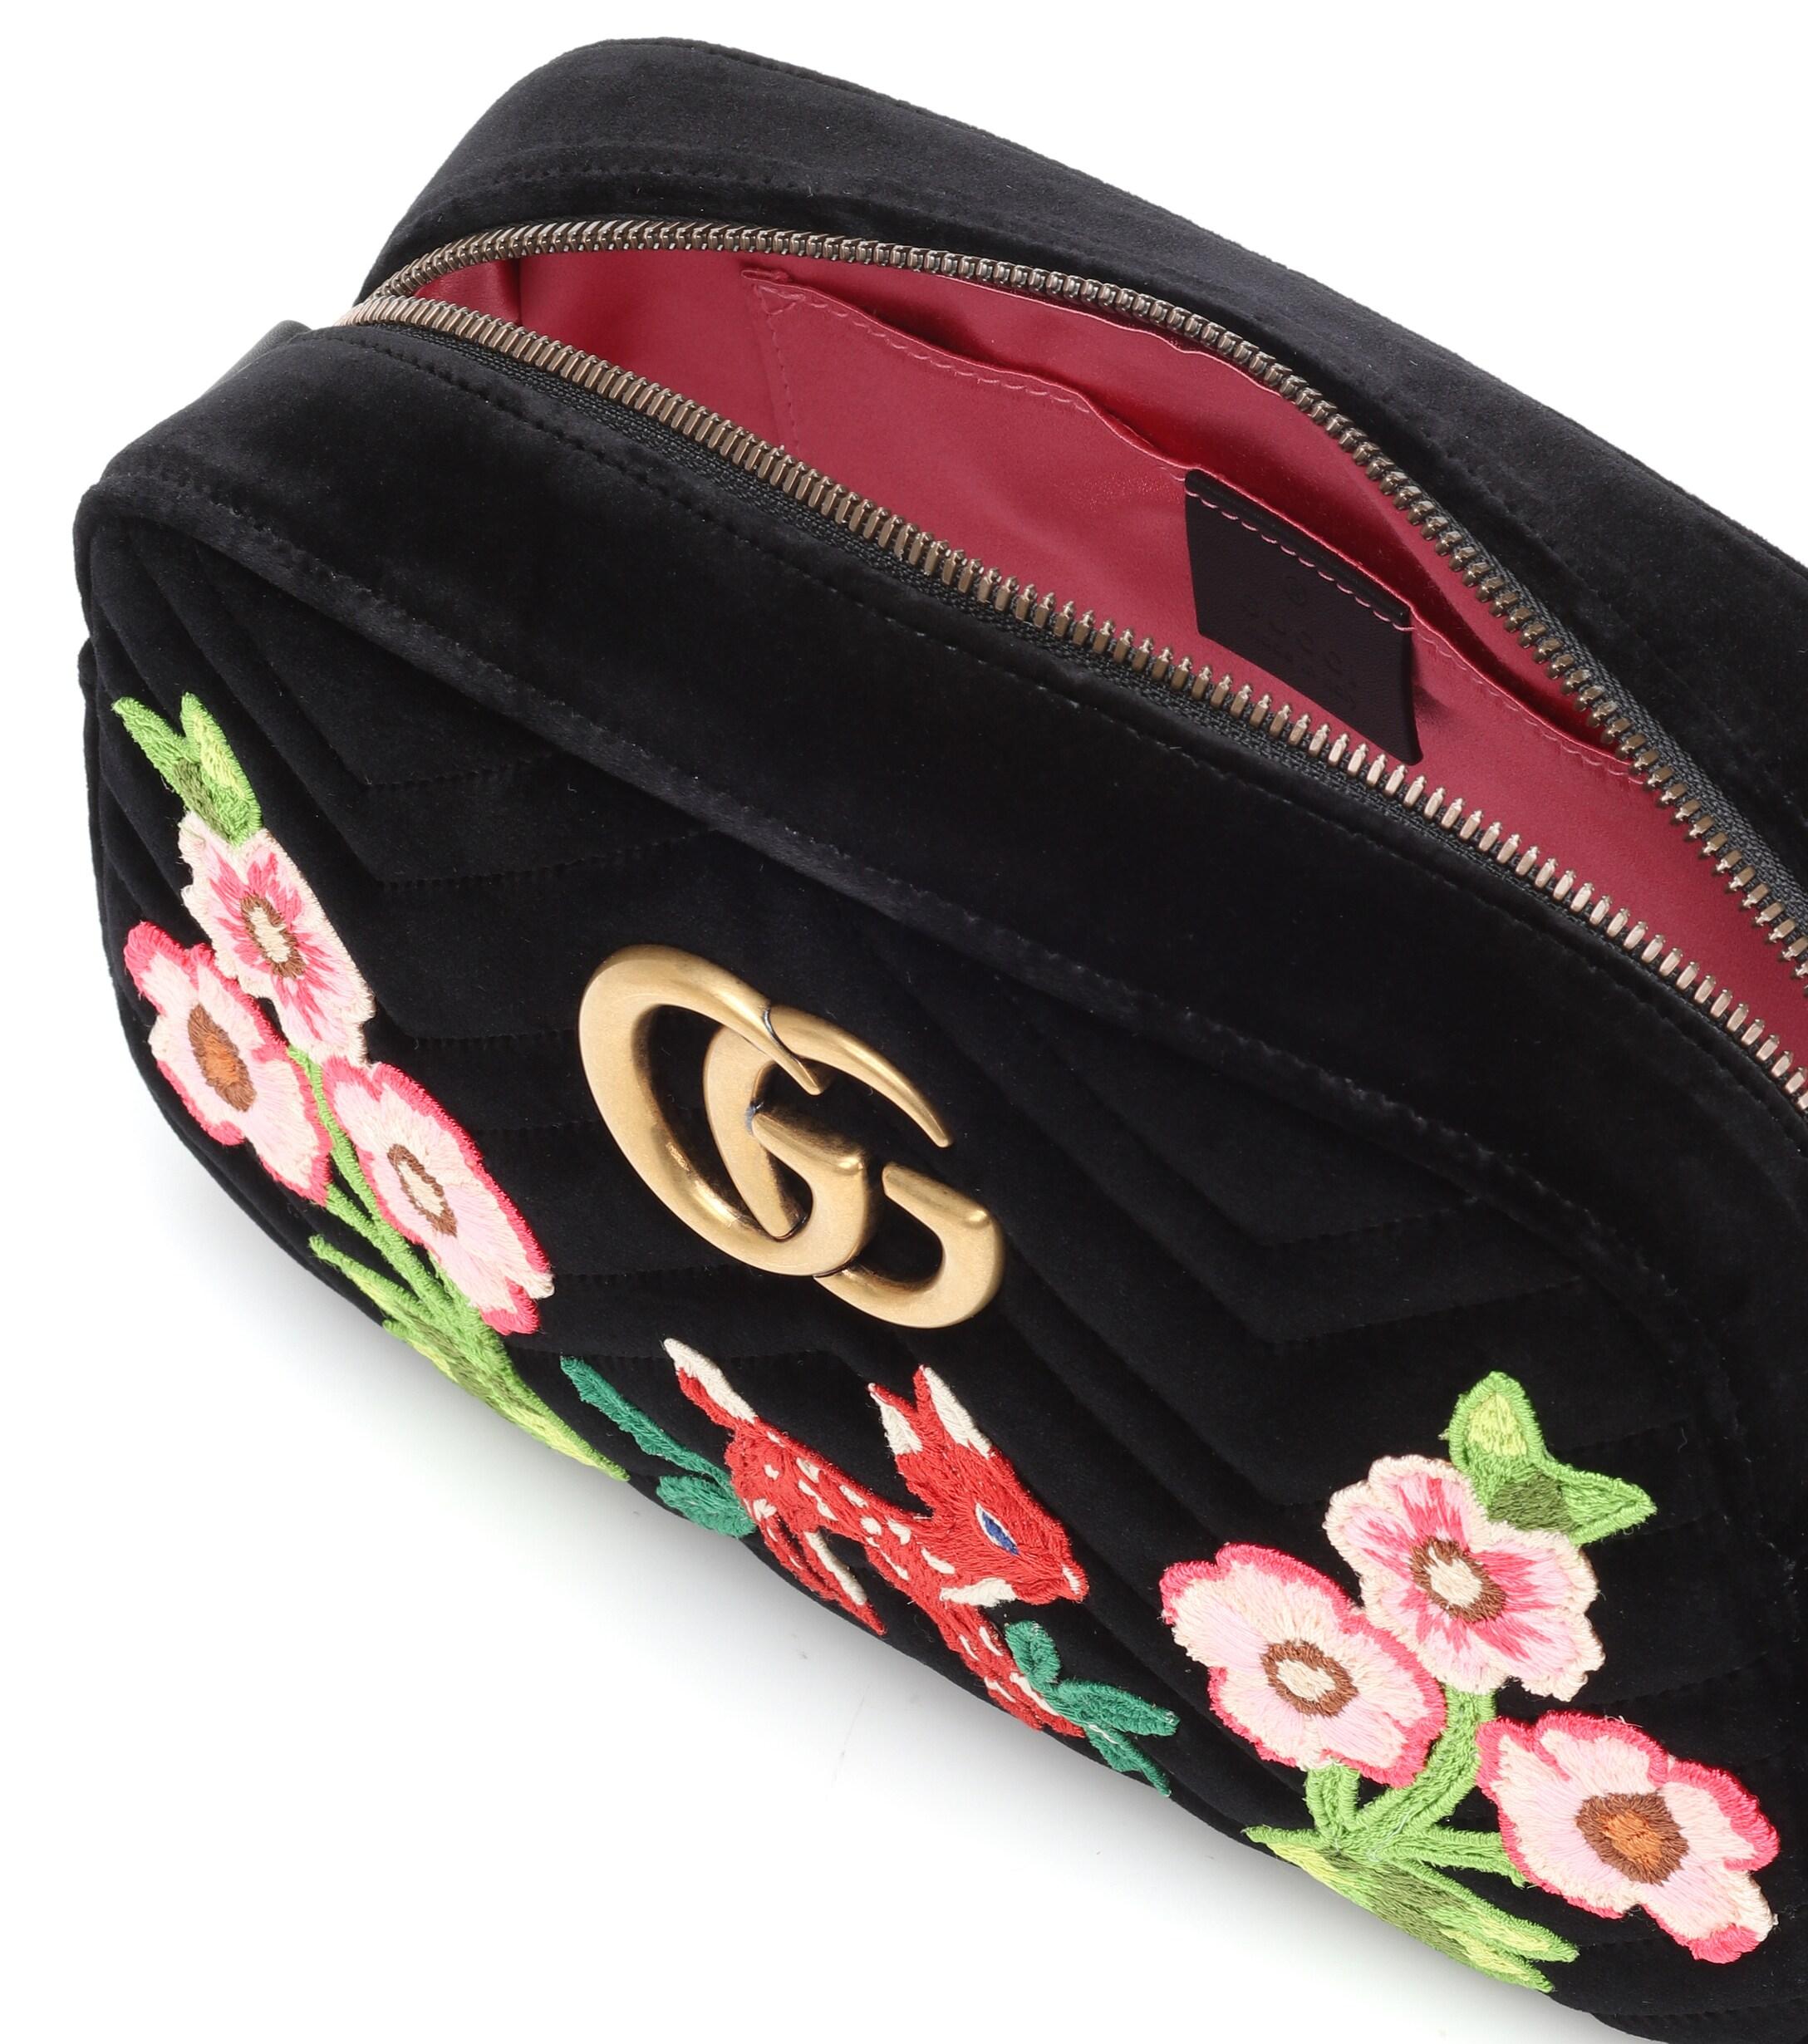 Gucci Leather GG Marmont Small Camera Shoulder Bag in Nero (Black) - Lyst